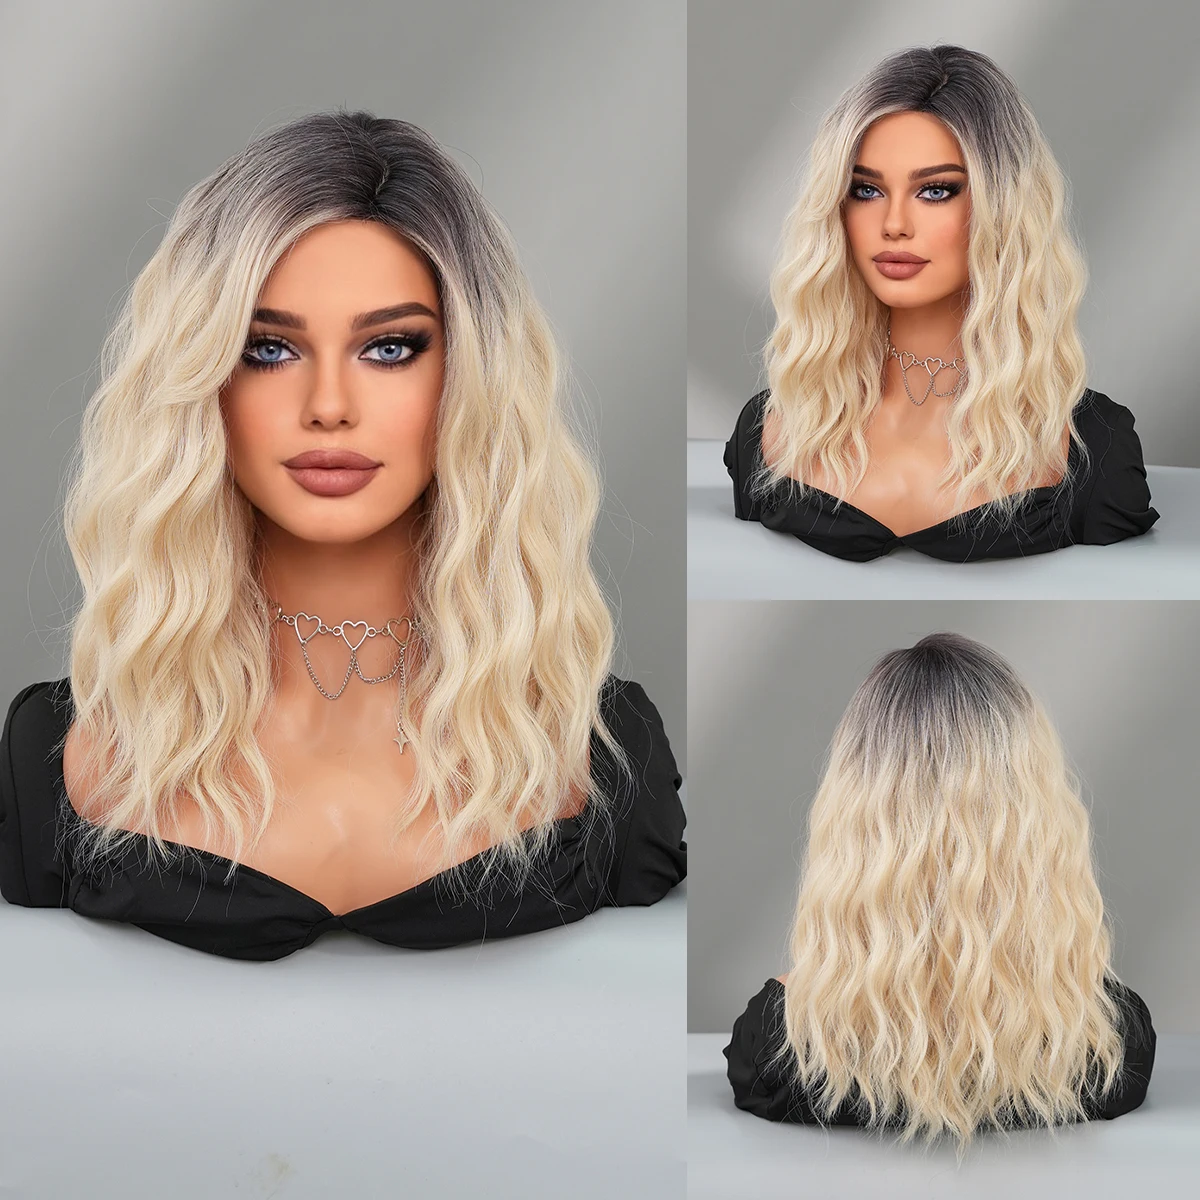 high quality equipment 20l digital display overhead stirrer laboratory PARK YUN Long Loose Body Wavy Light Blonde Wig for Women Use High Density Synthetic Side Part Wigs Overhead Dyeing Black Wigs